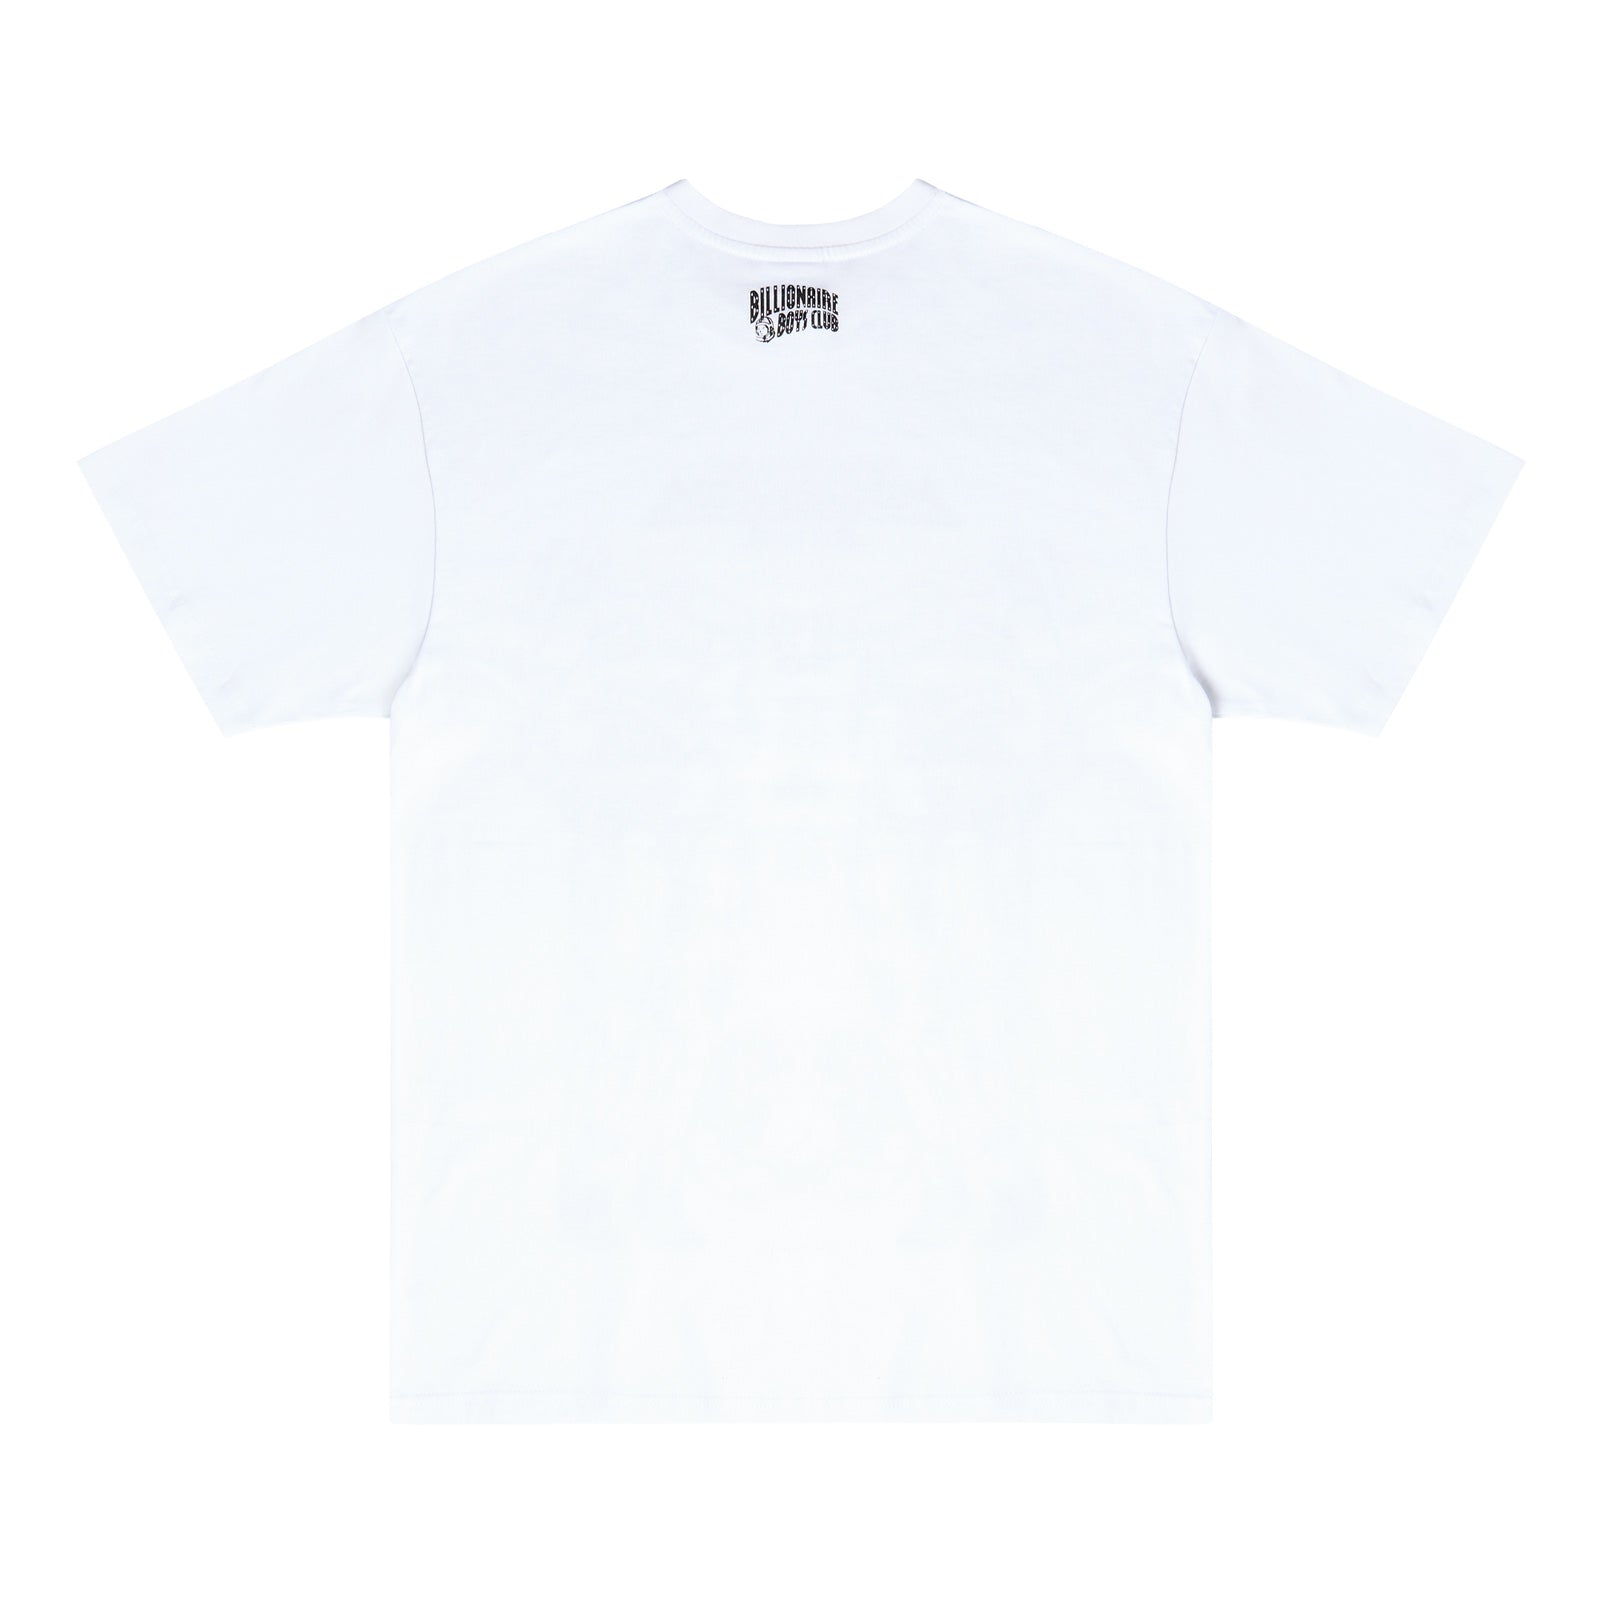 Casio G-Shock Master of G - Land Black GW9500TLC-1 Men BB Peace SS Tee White (Oversized Fit) - T-SHIRTS Canada